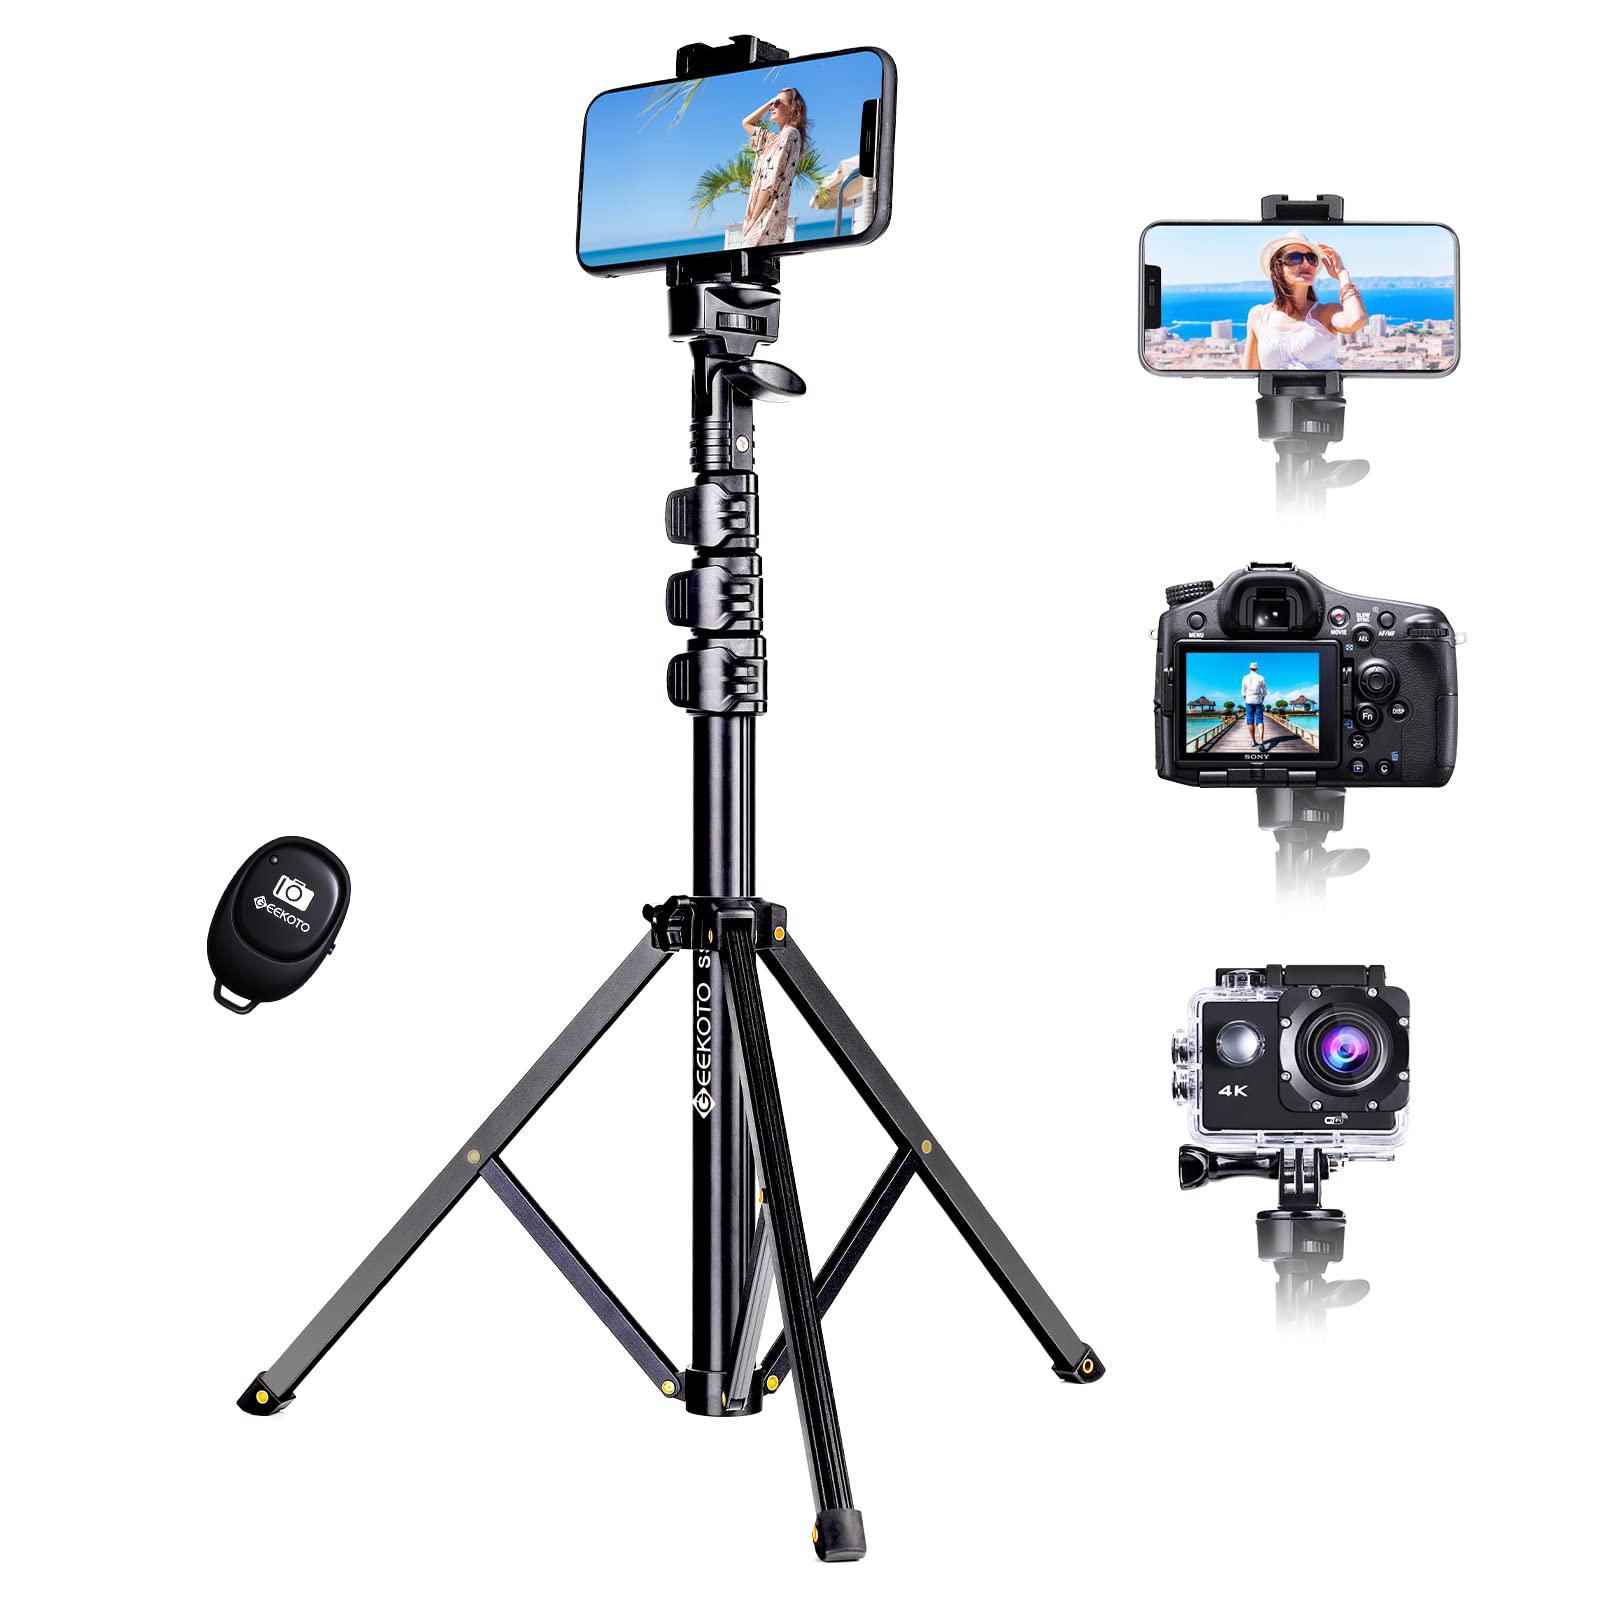 geekoto cell phone tripod: extendable phone tripod,selfie stick with remote,heavy-duty aluminum built,for iphone&android phon